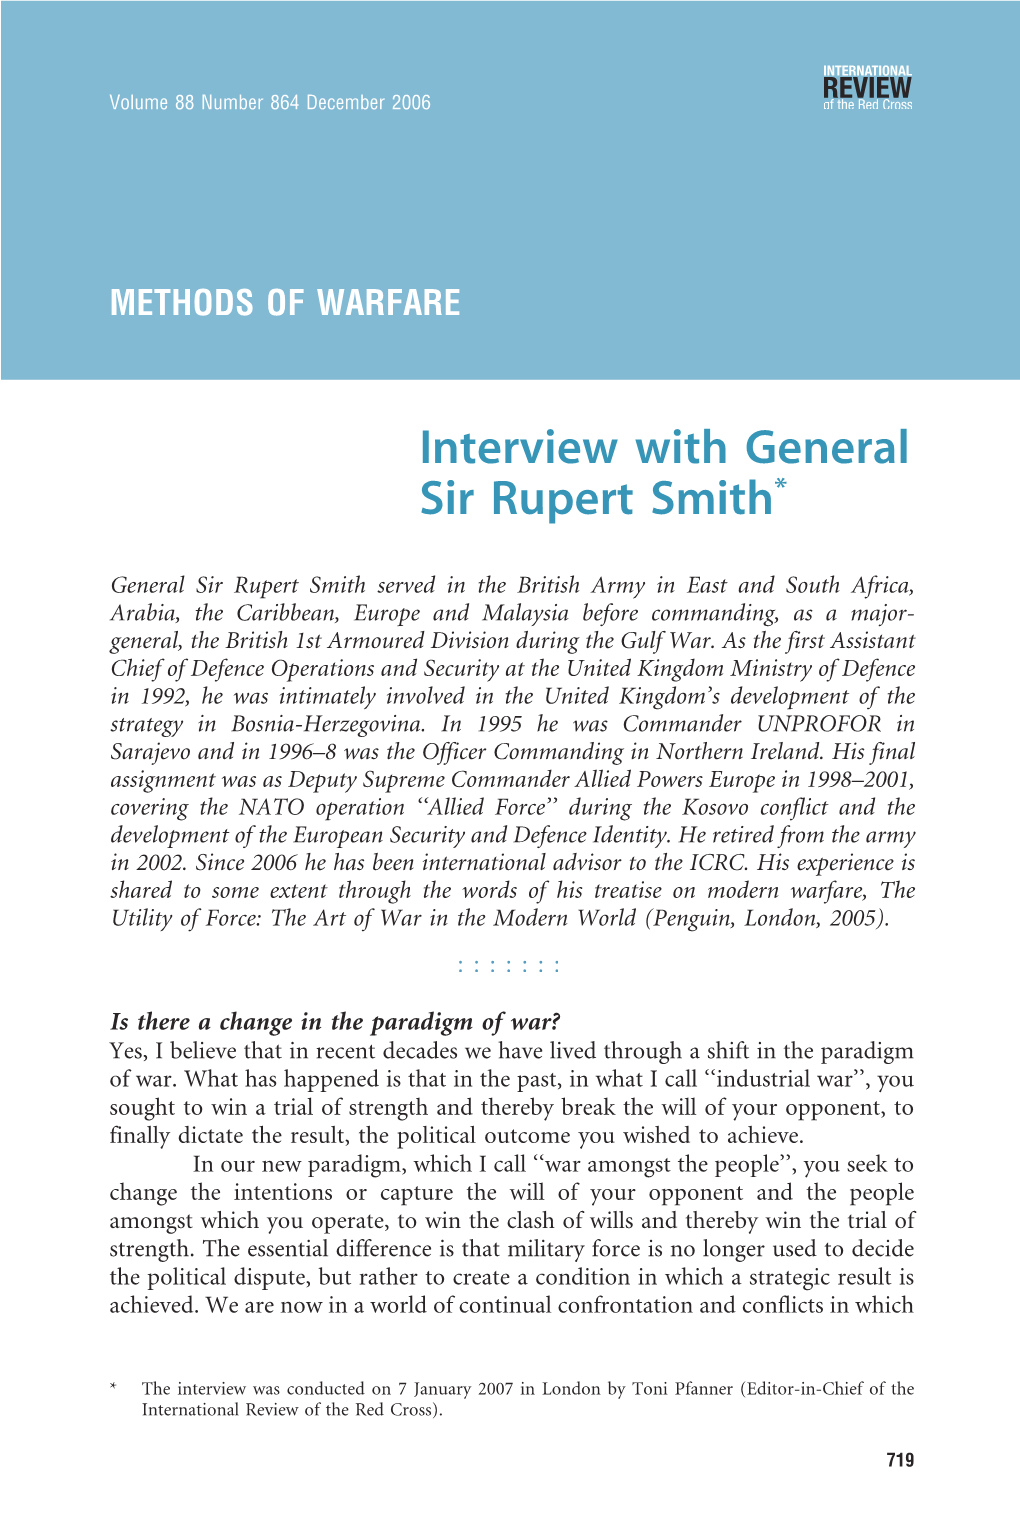 Interview with General Sir Rupert Smith*